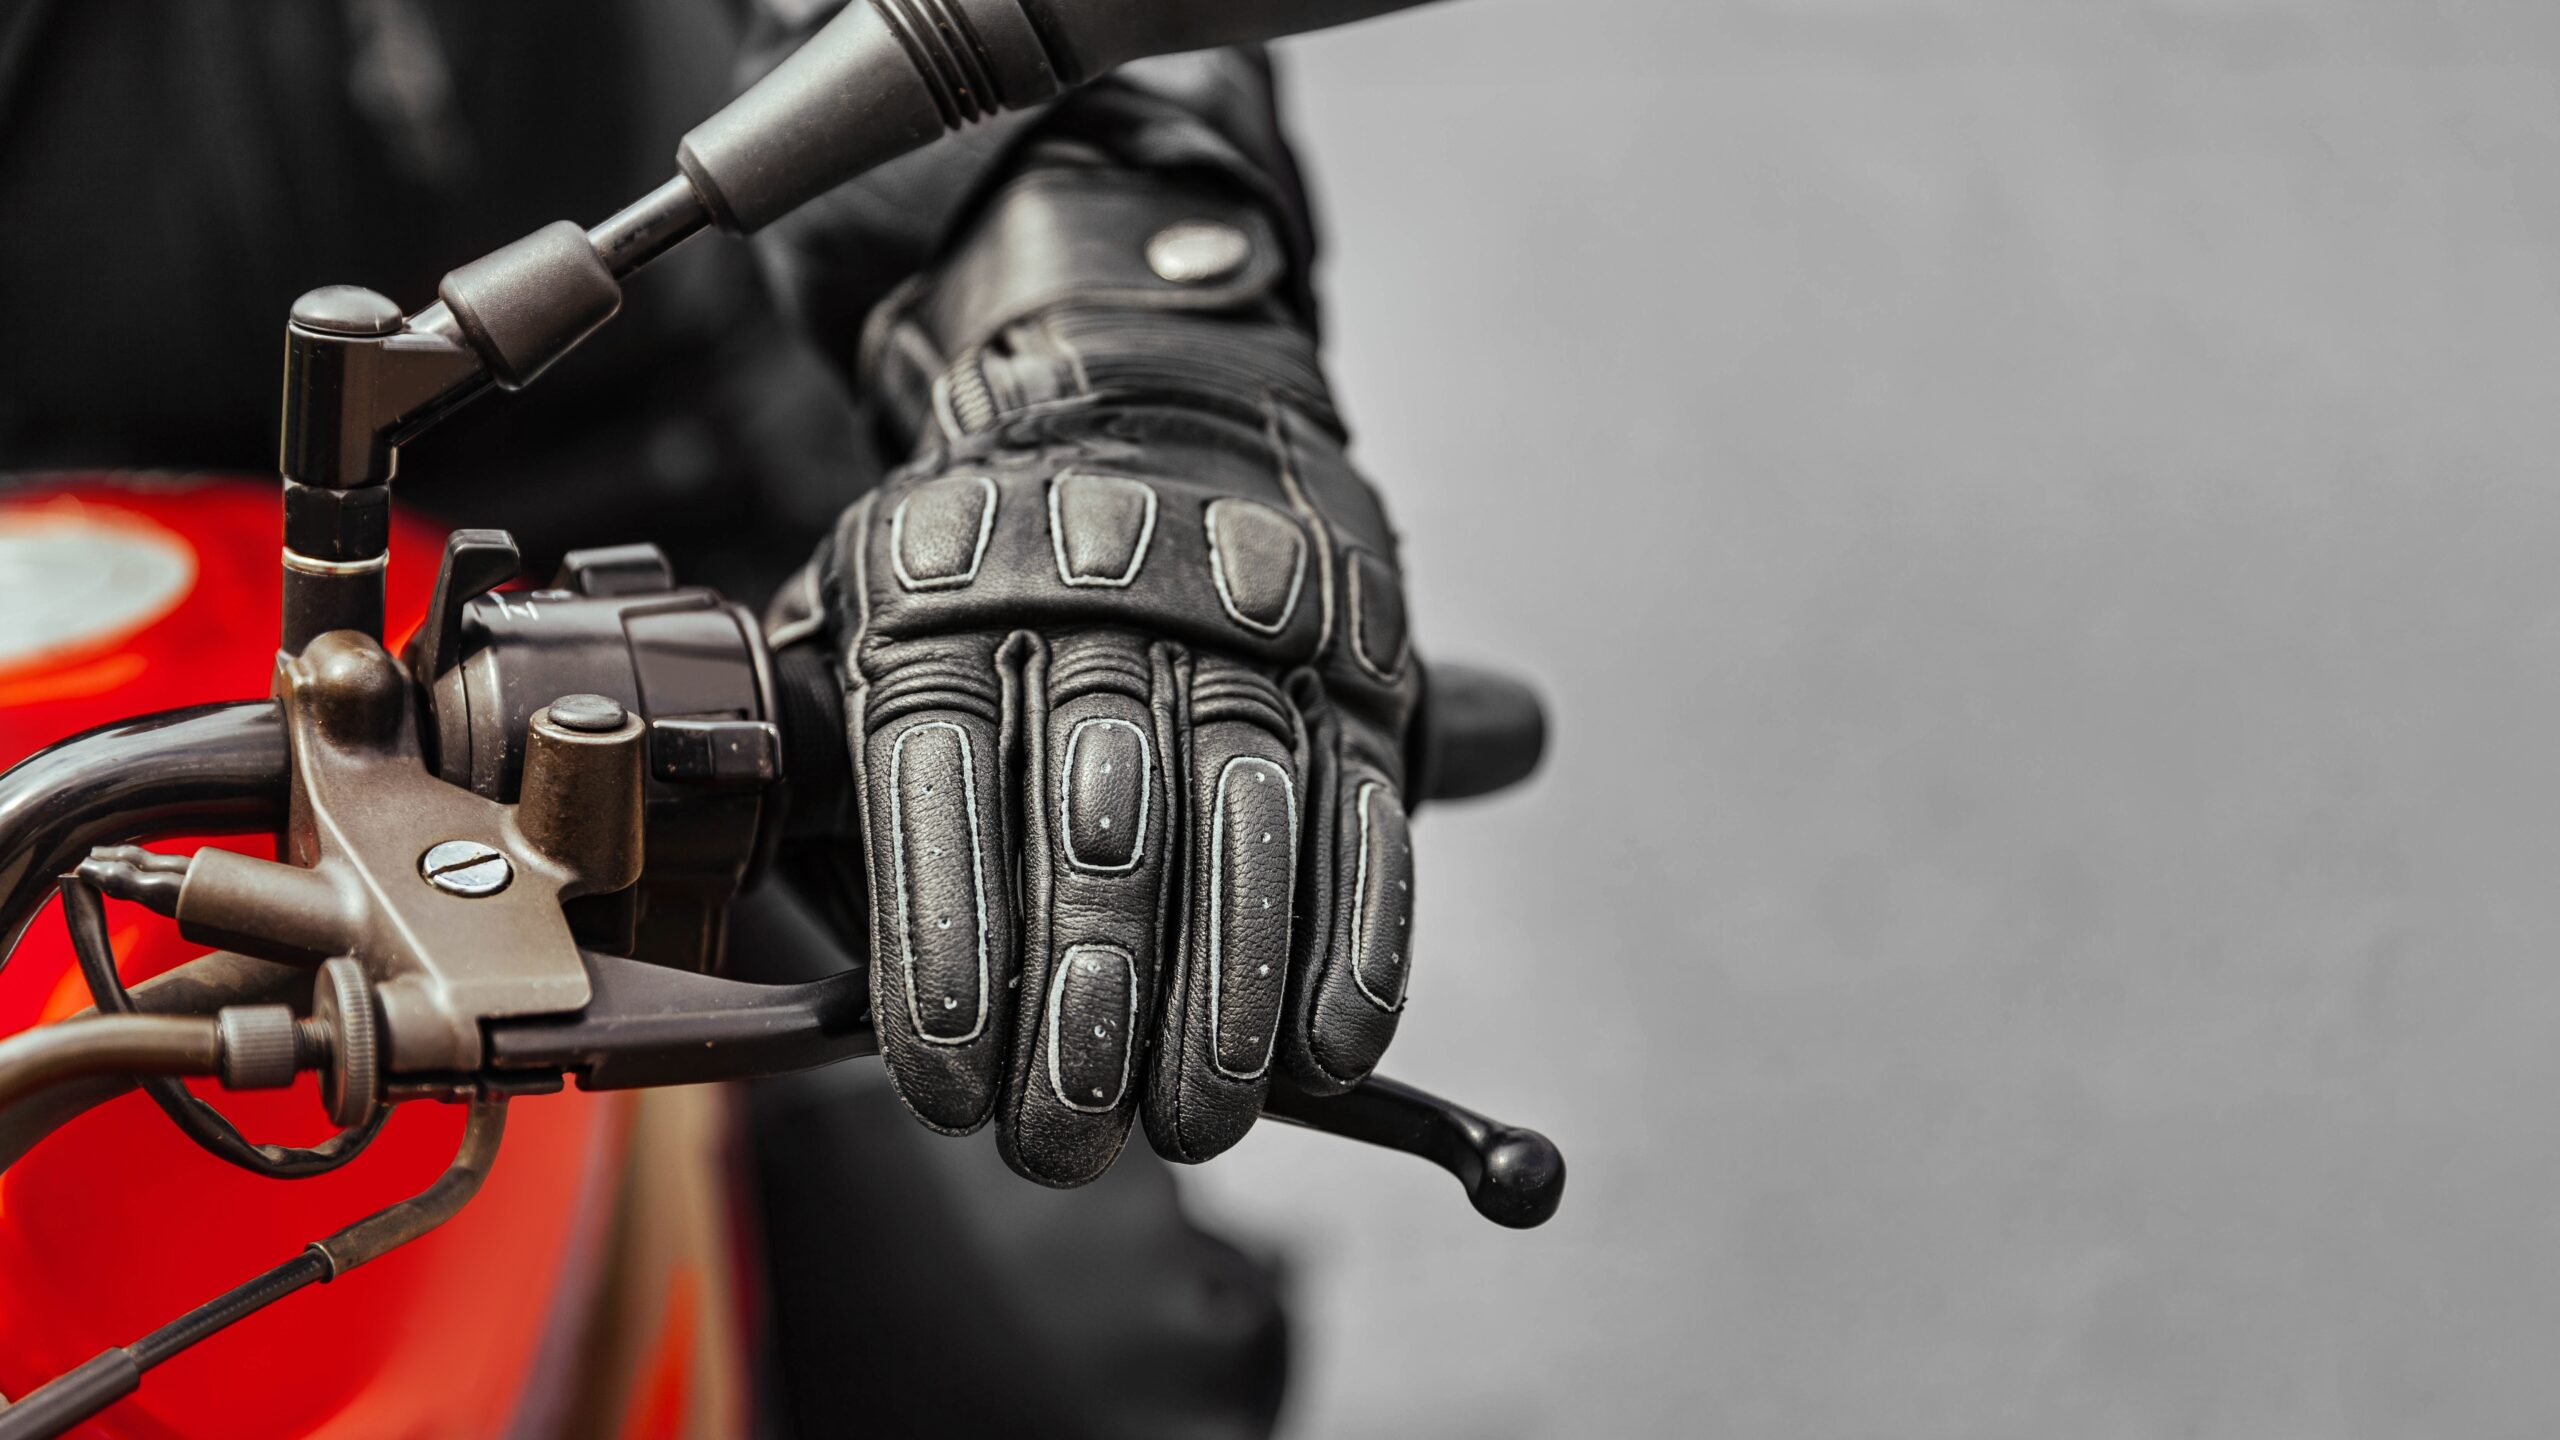 Hand in glove on motorcycle grip representing importance of Birmingham motorcycle accident lawyer